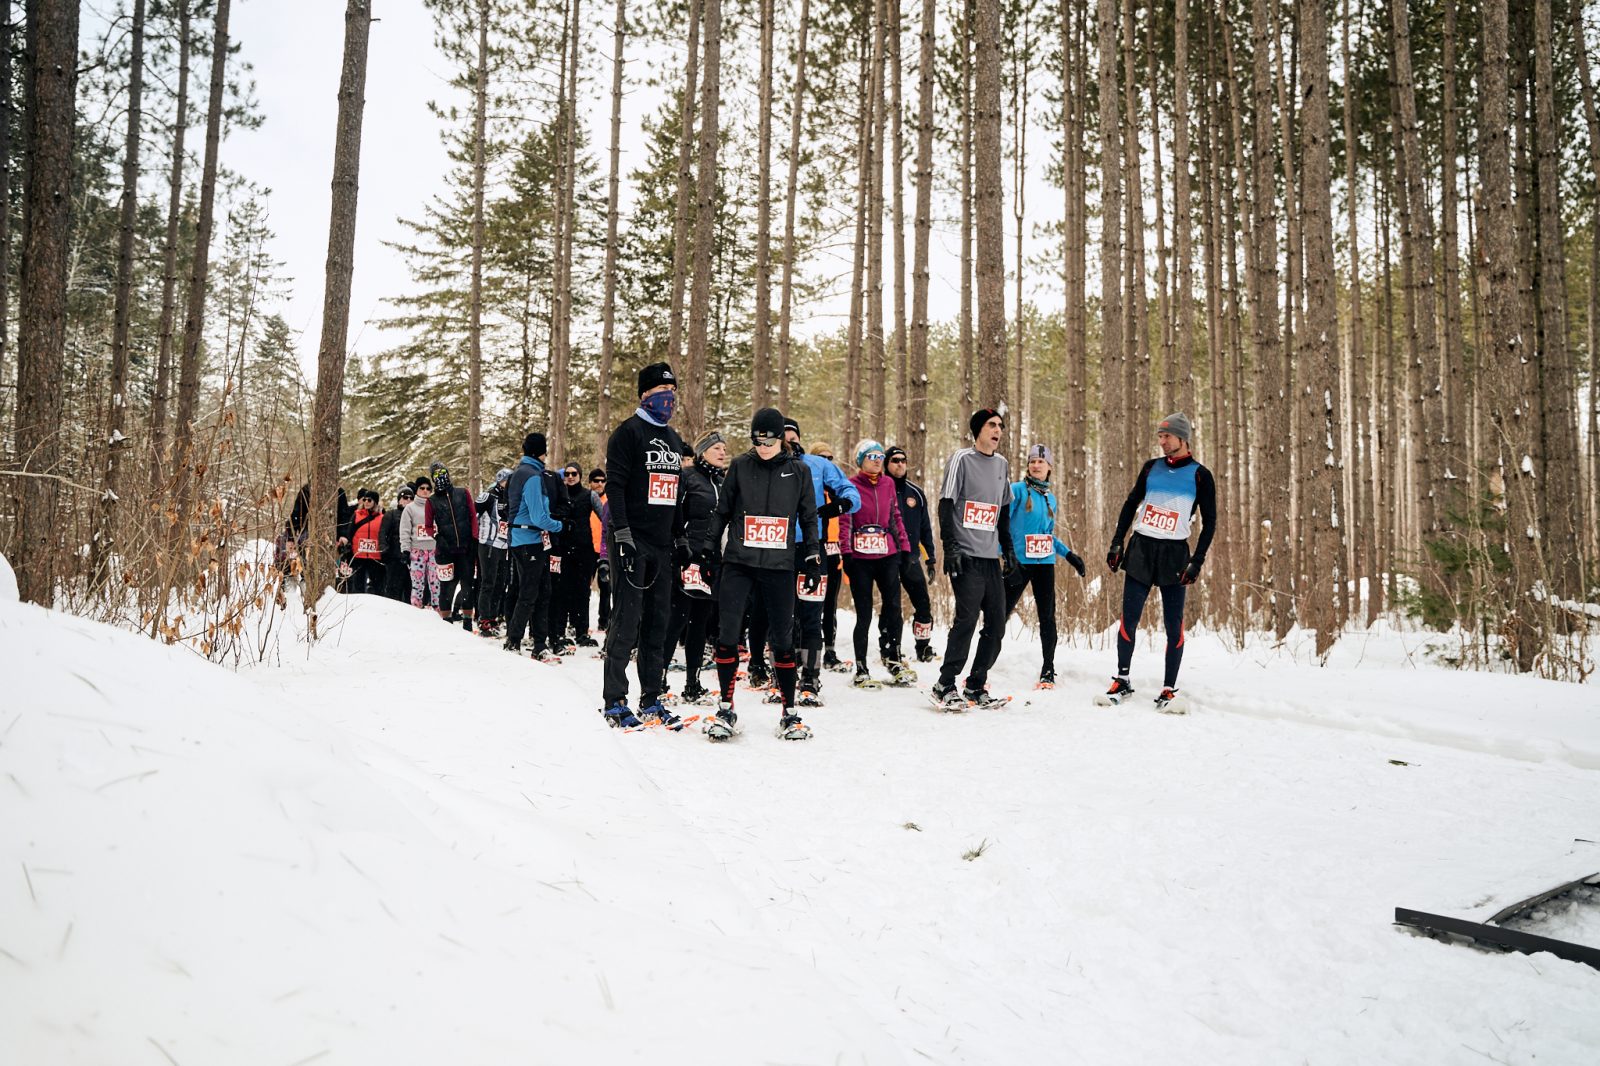 Canadian Snowshoe Championship Comes to Hammond